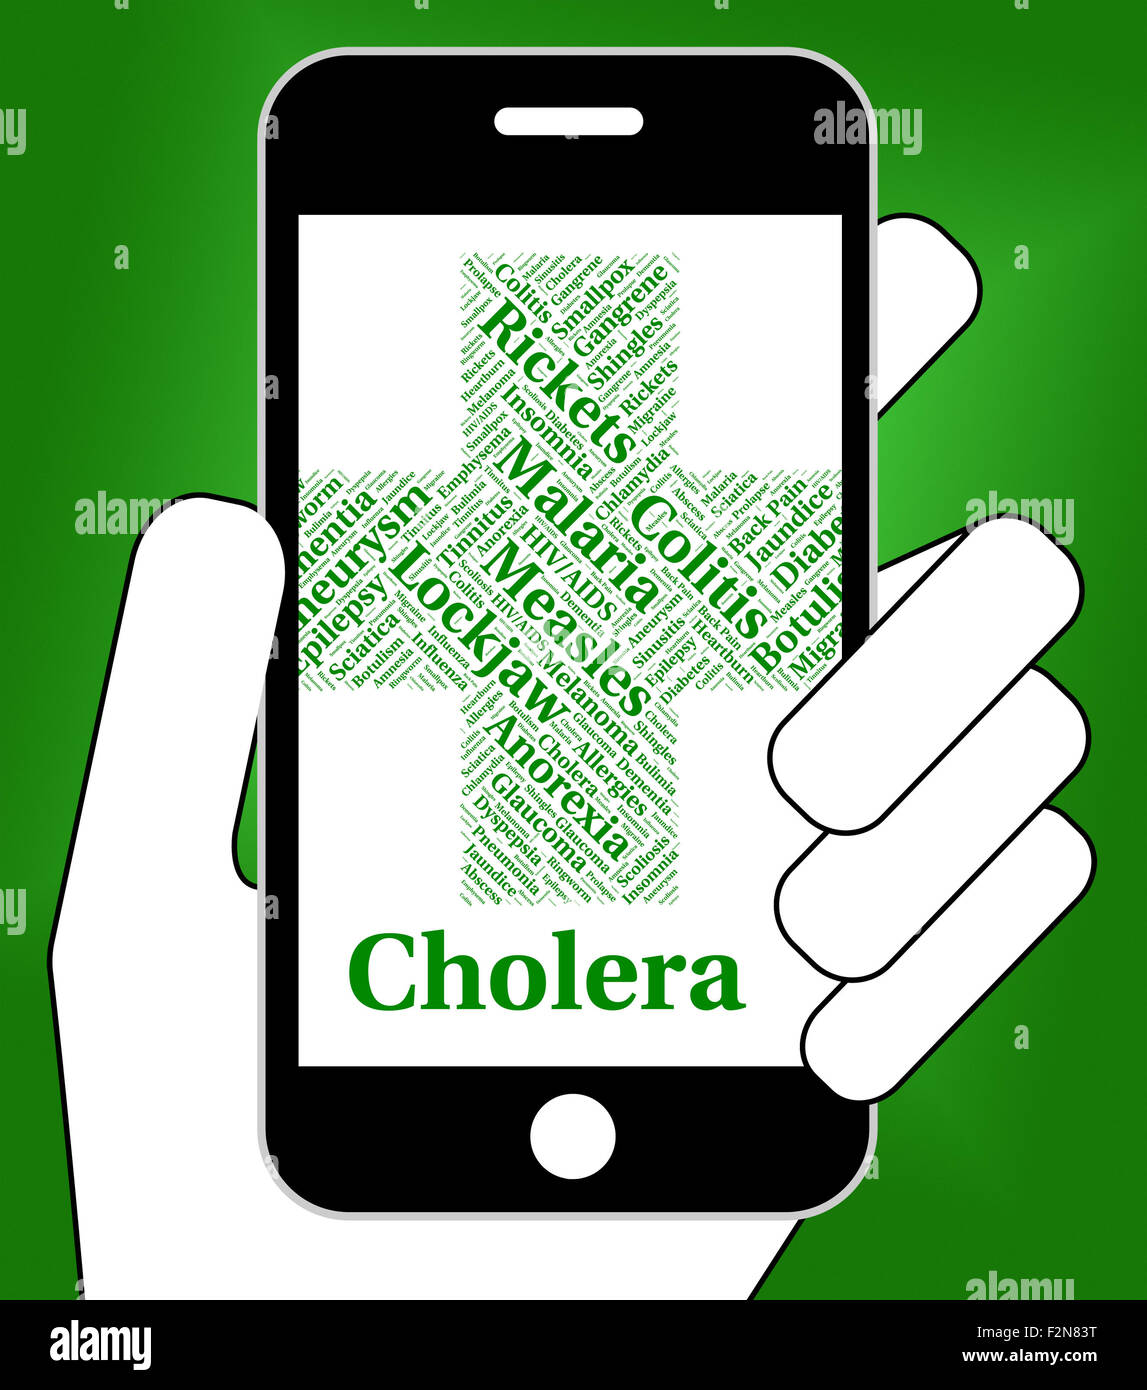 Cholera Disease Meaning Poor Health And Infirmity Stock Photo